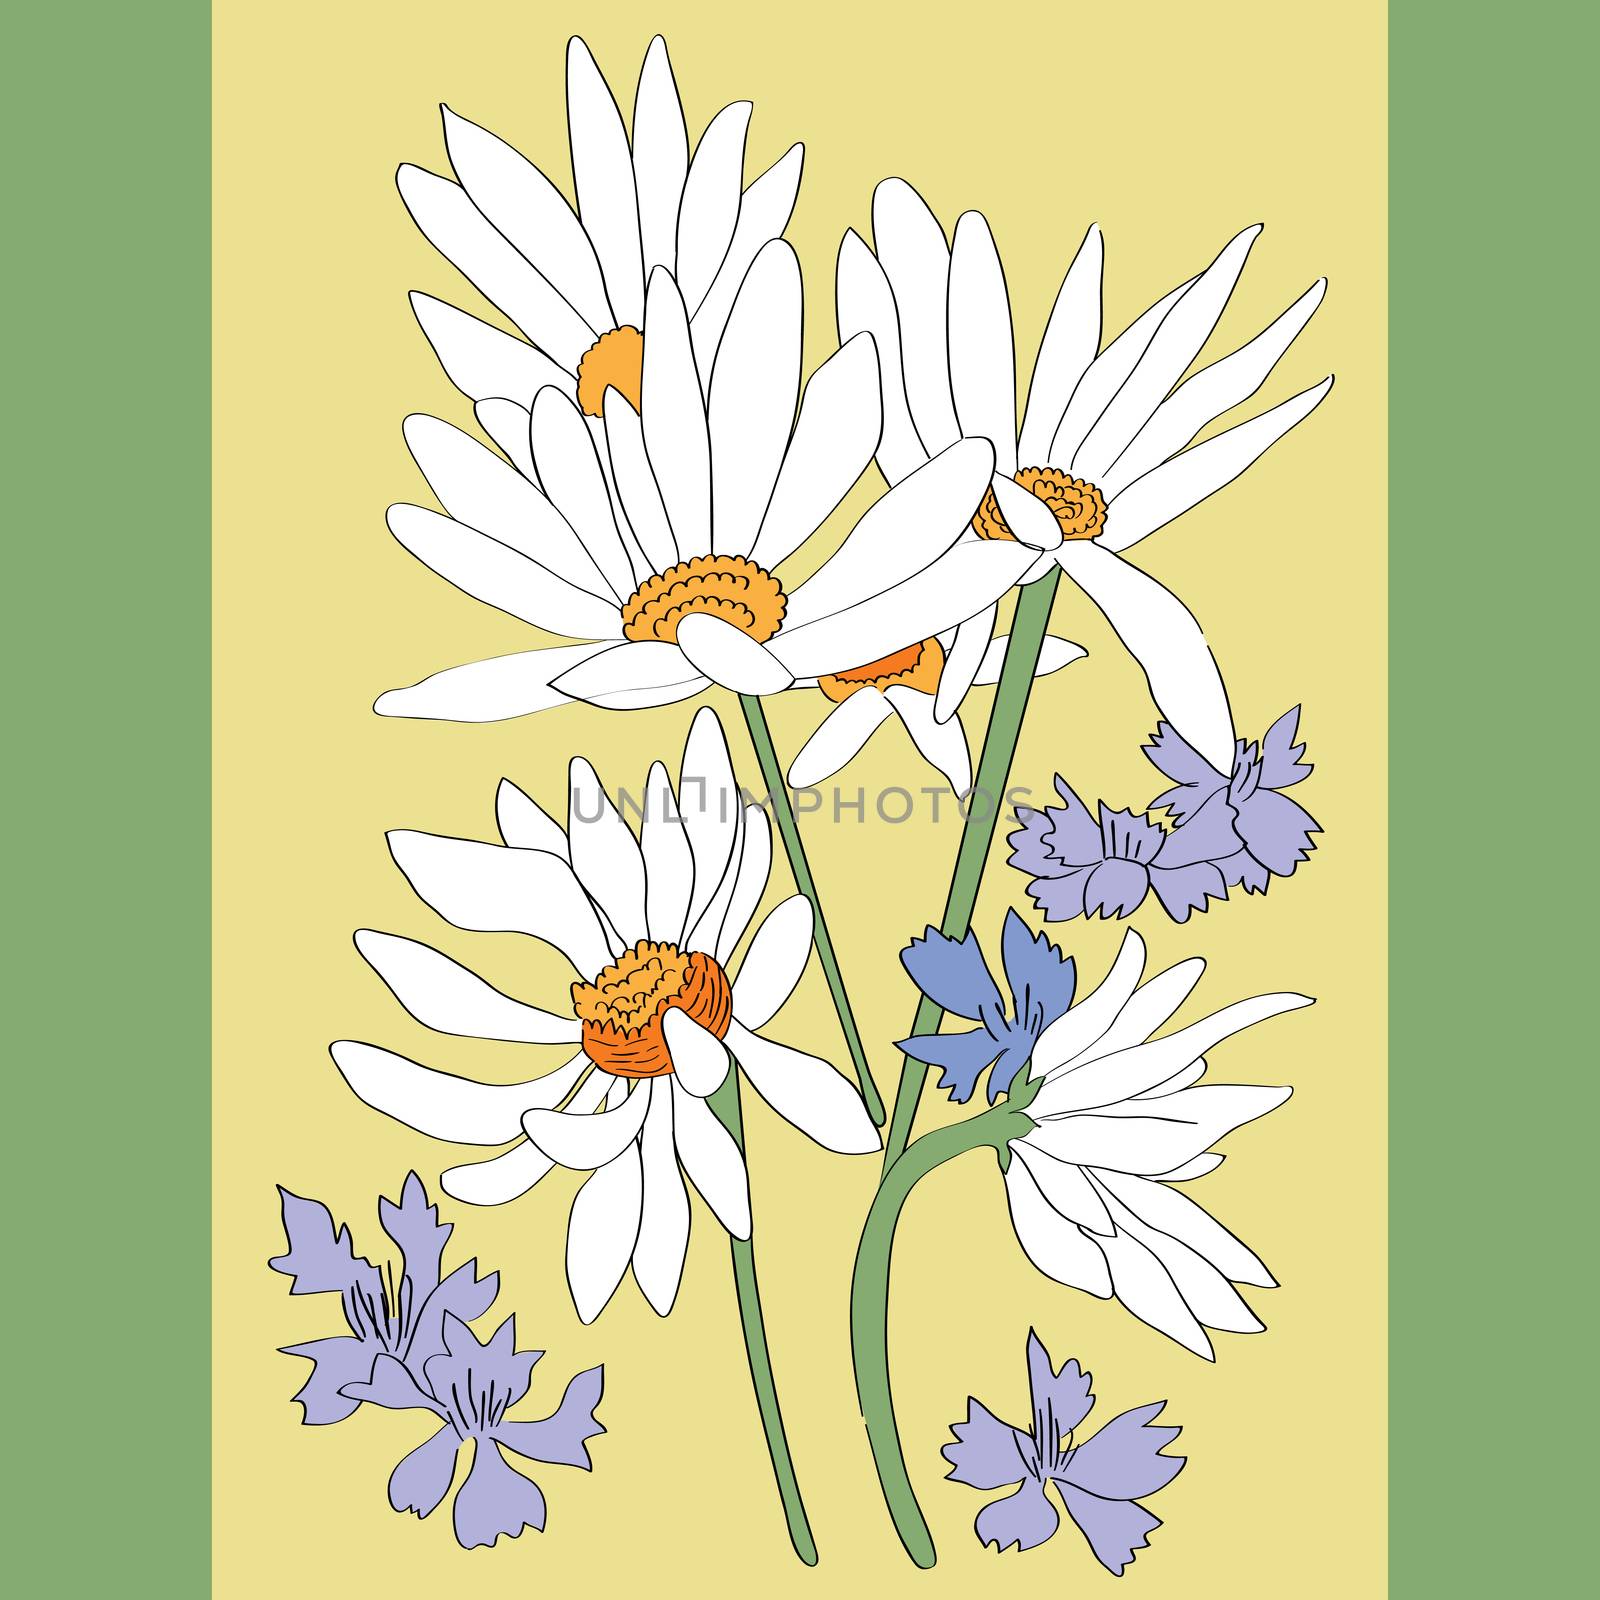 Hand drawn illustration of a greeting card with daisies and cornflowers over a colored background